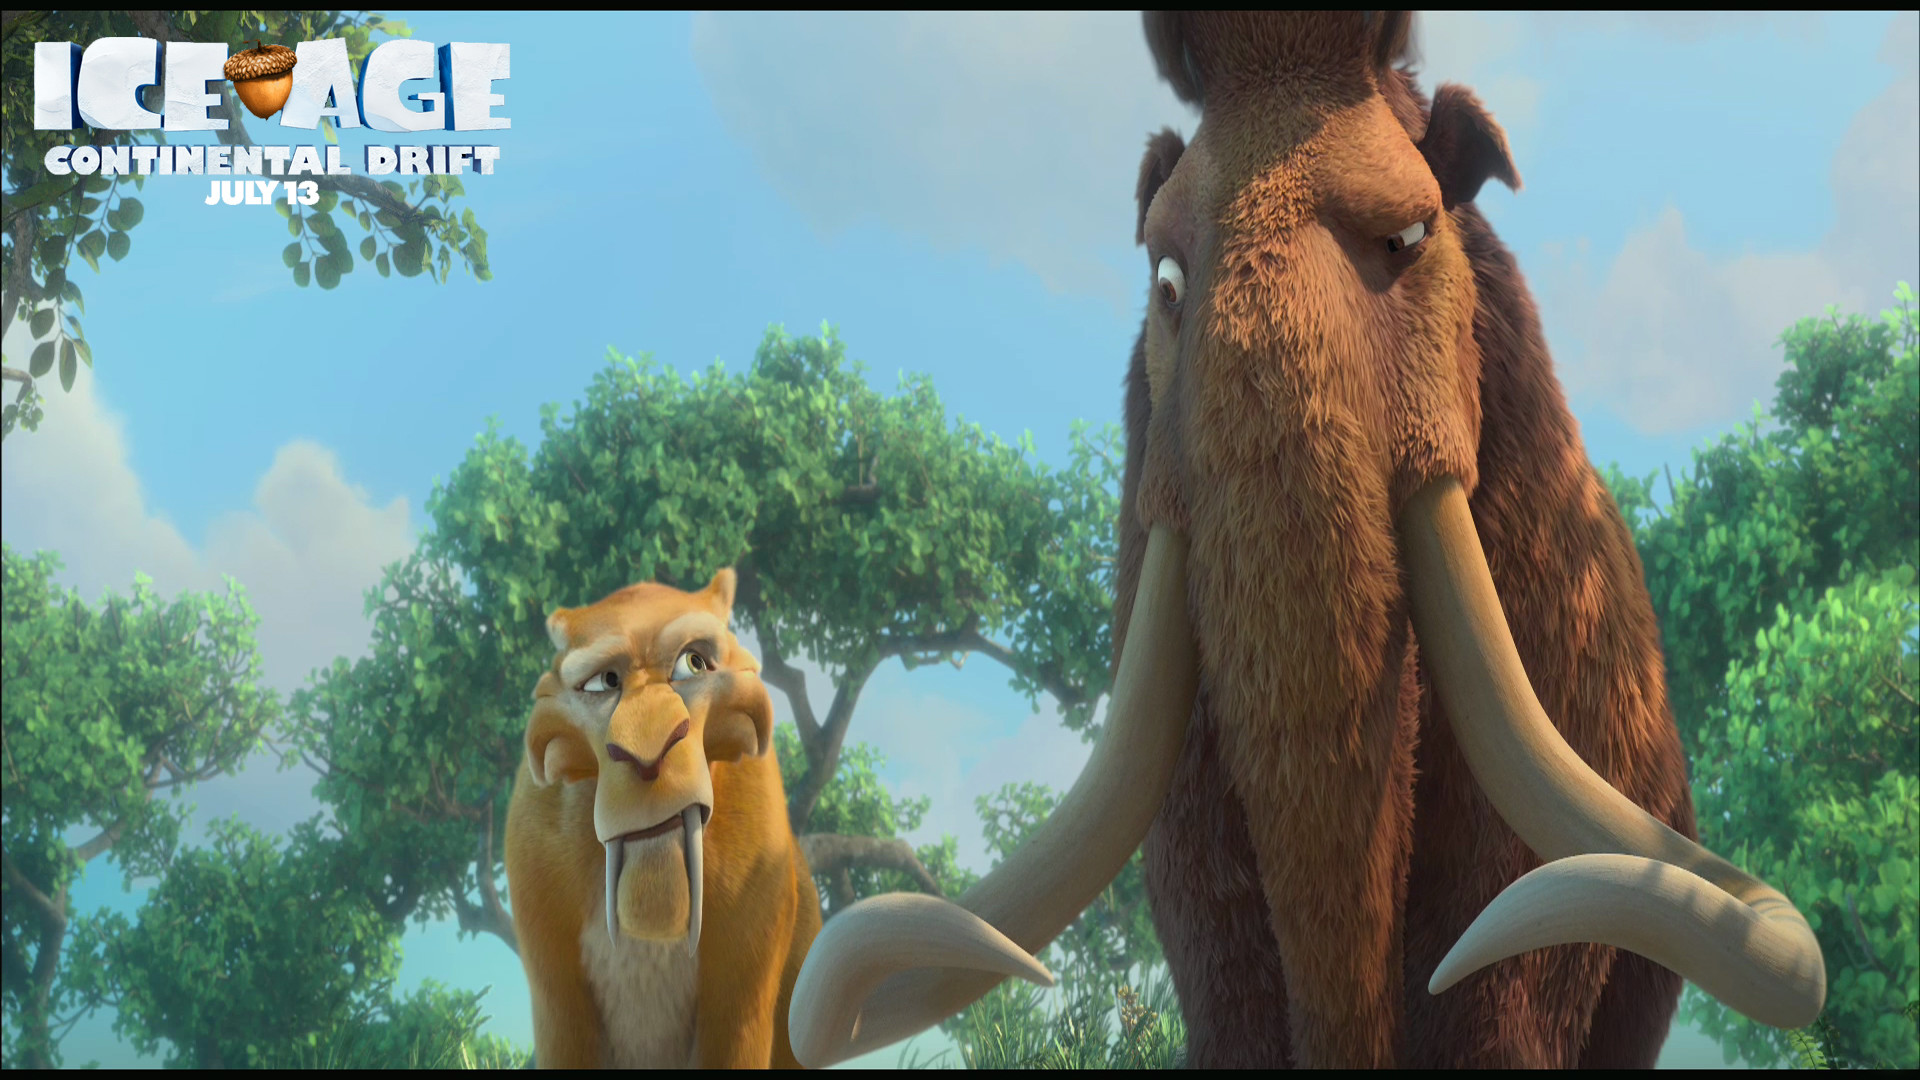 1920x1080 Ice Age Sid Wallpapers 4 | Ice Age Sid Wallpapers | Pinterest | Ice age sid  and Ice age